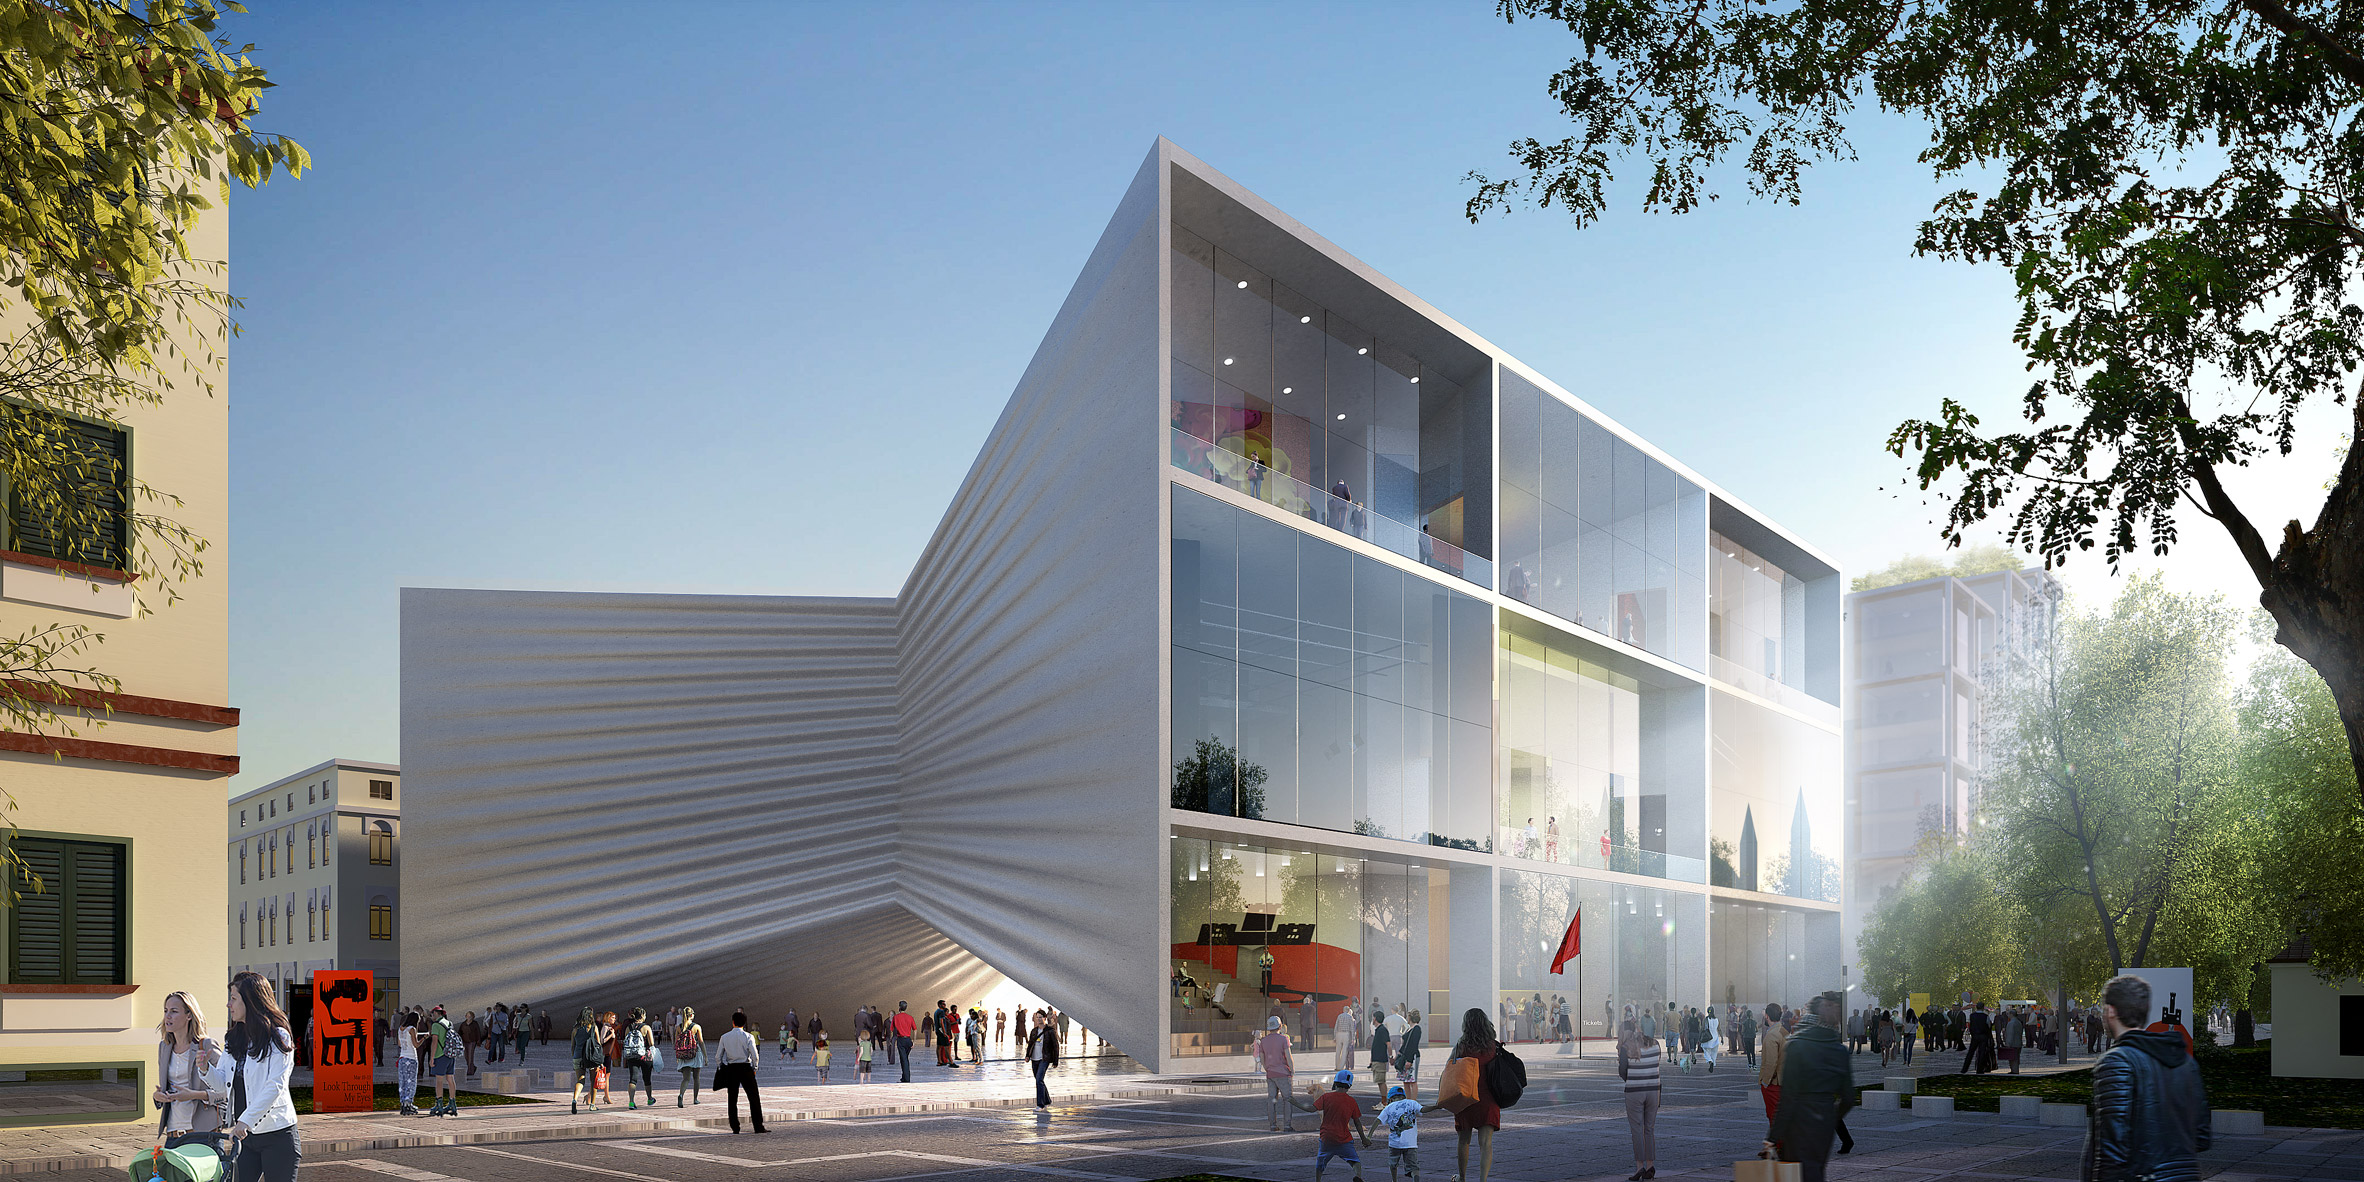 BIG designs "bow-tie-shaped" theatre for Albania's capital